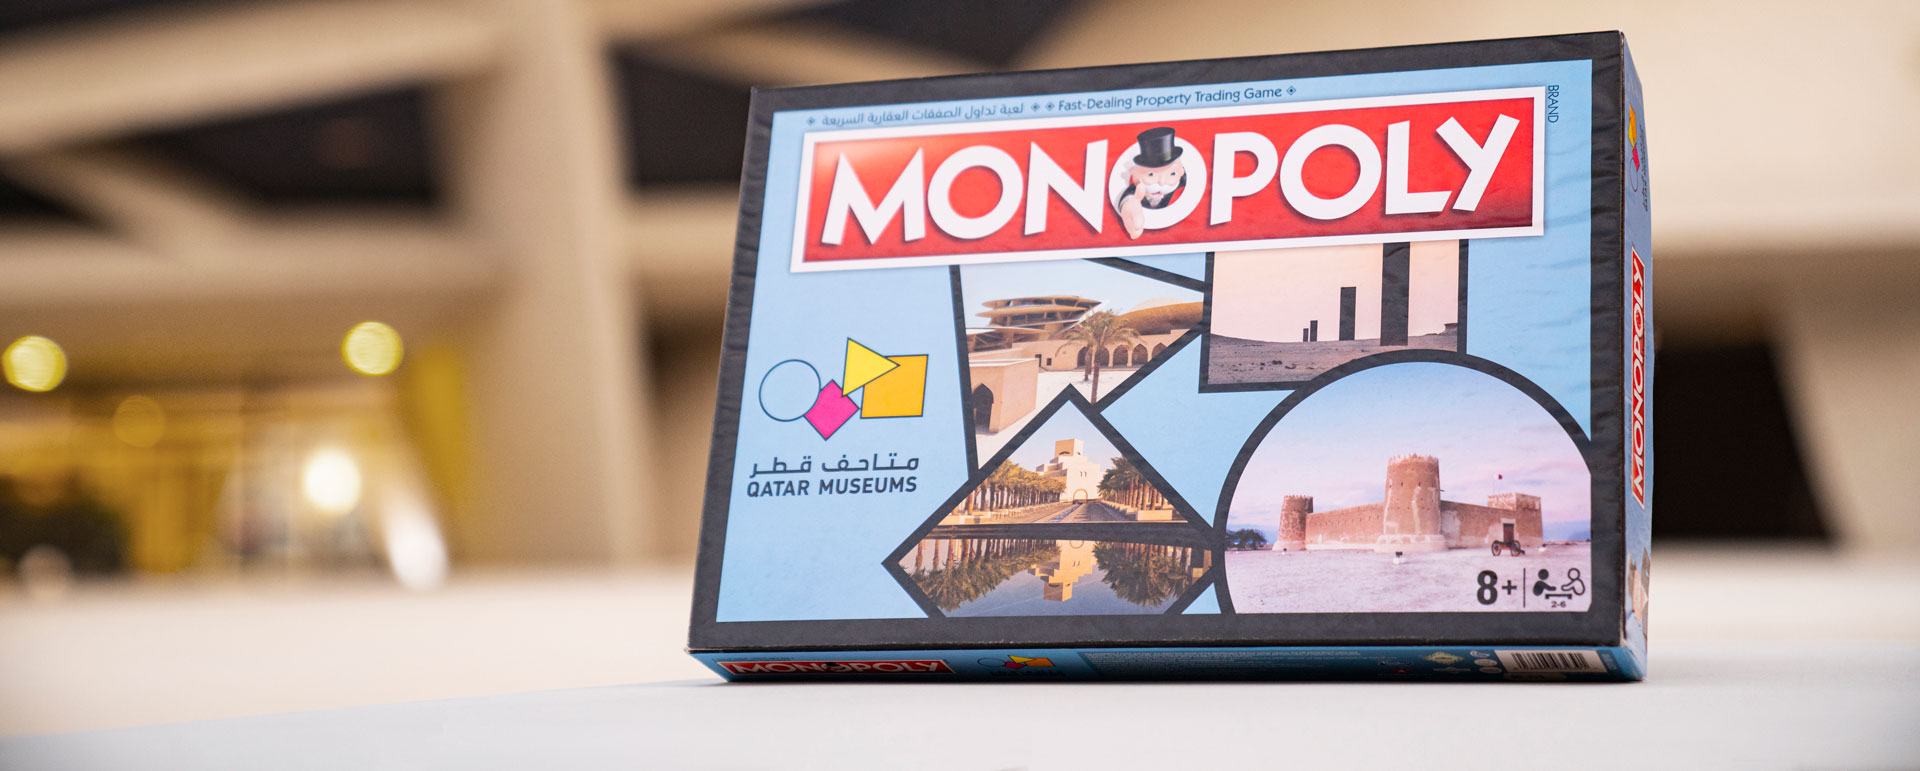 Explore More of Qatar with Qatar Museums’ Monopoly Challenge